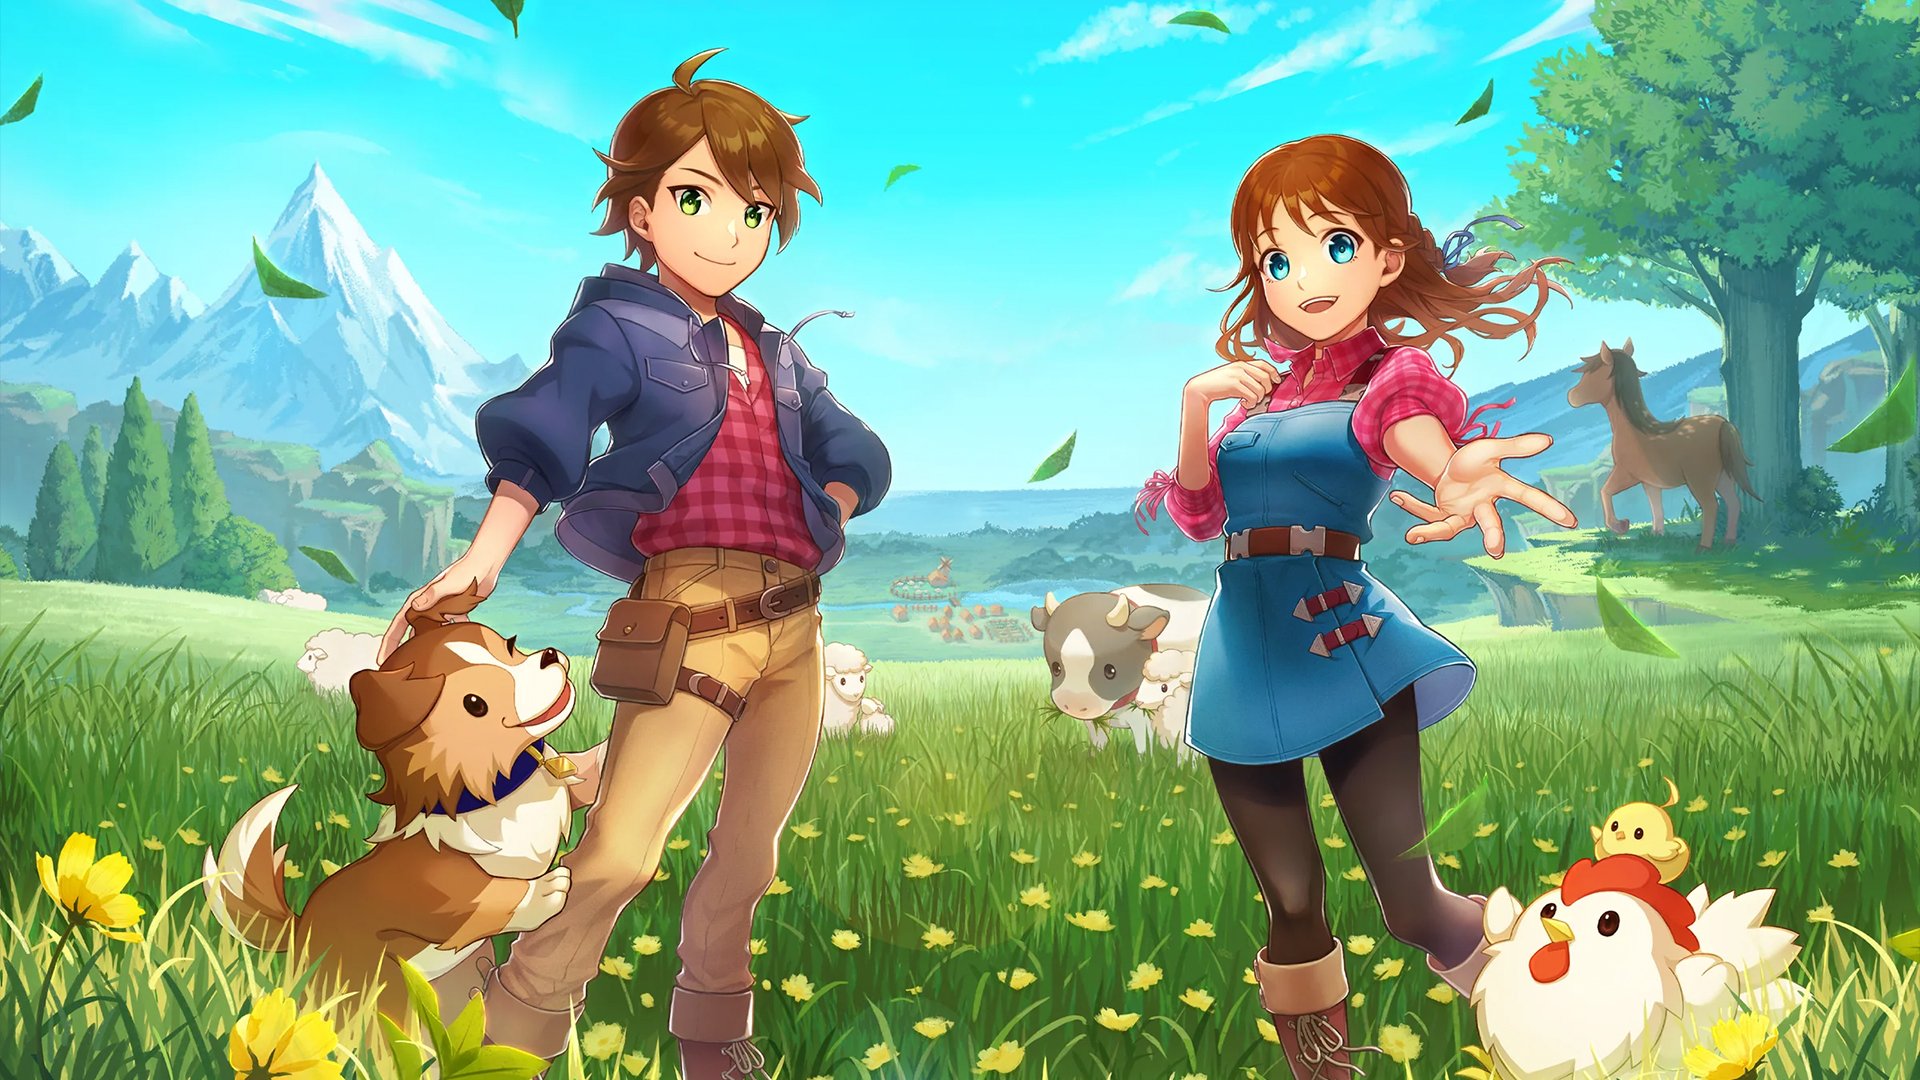 Harvest Moon: The Winds of Anthos Launches New DLC Pack Adding New Crops, Fish and Recipes